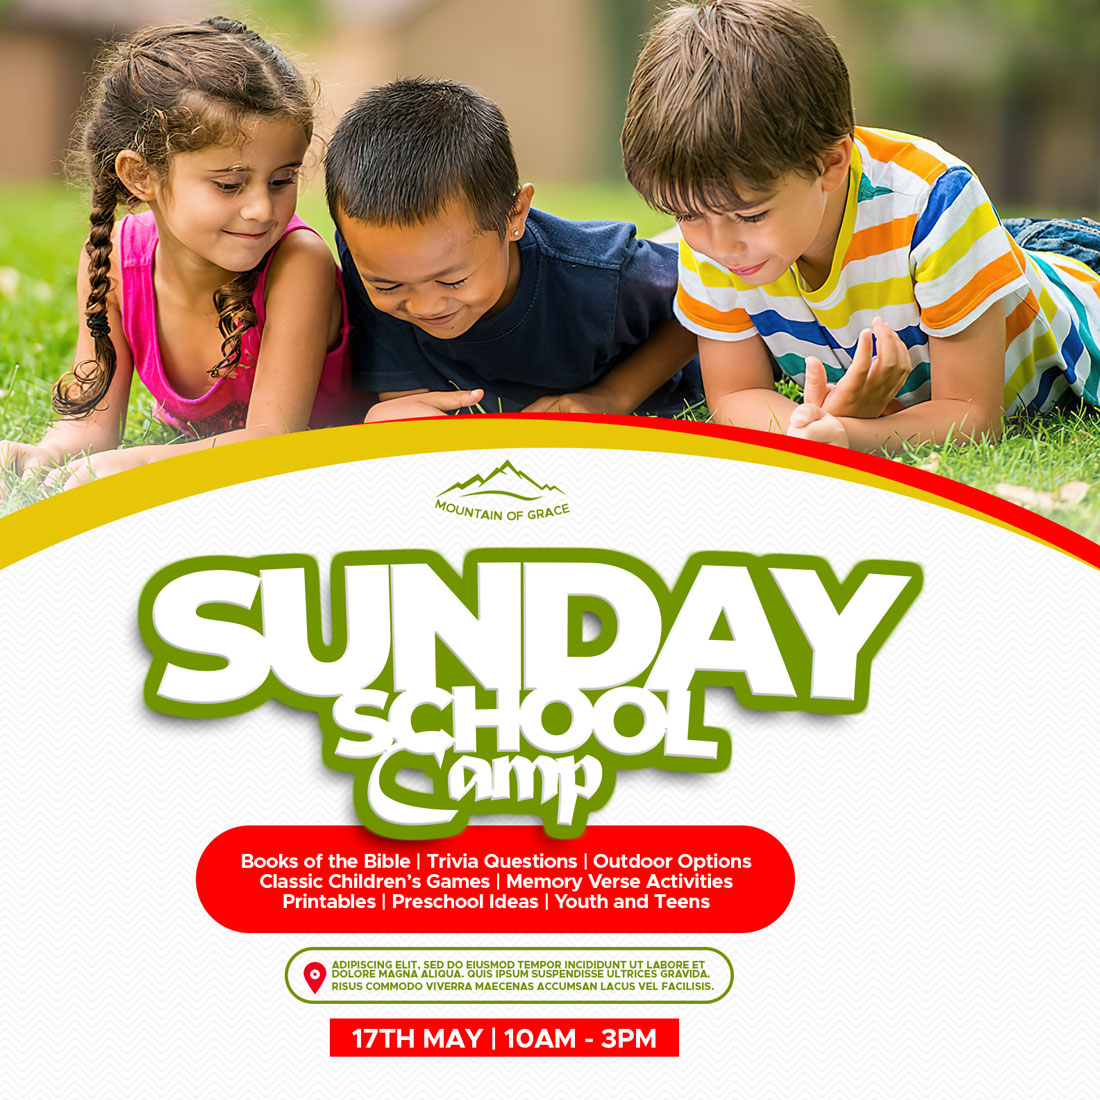 Sunday School Flyer Poster Template cove rimage.